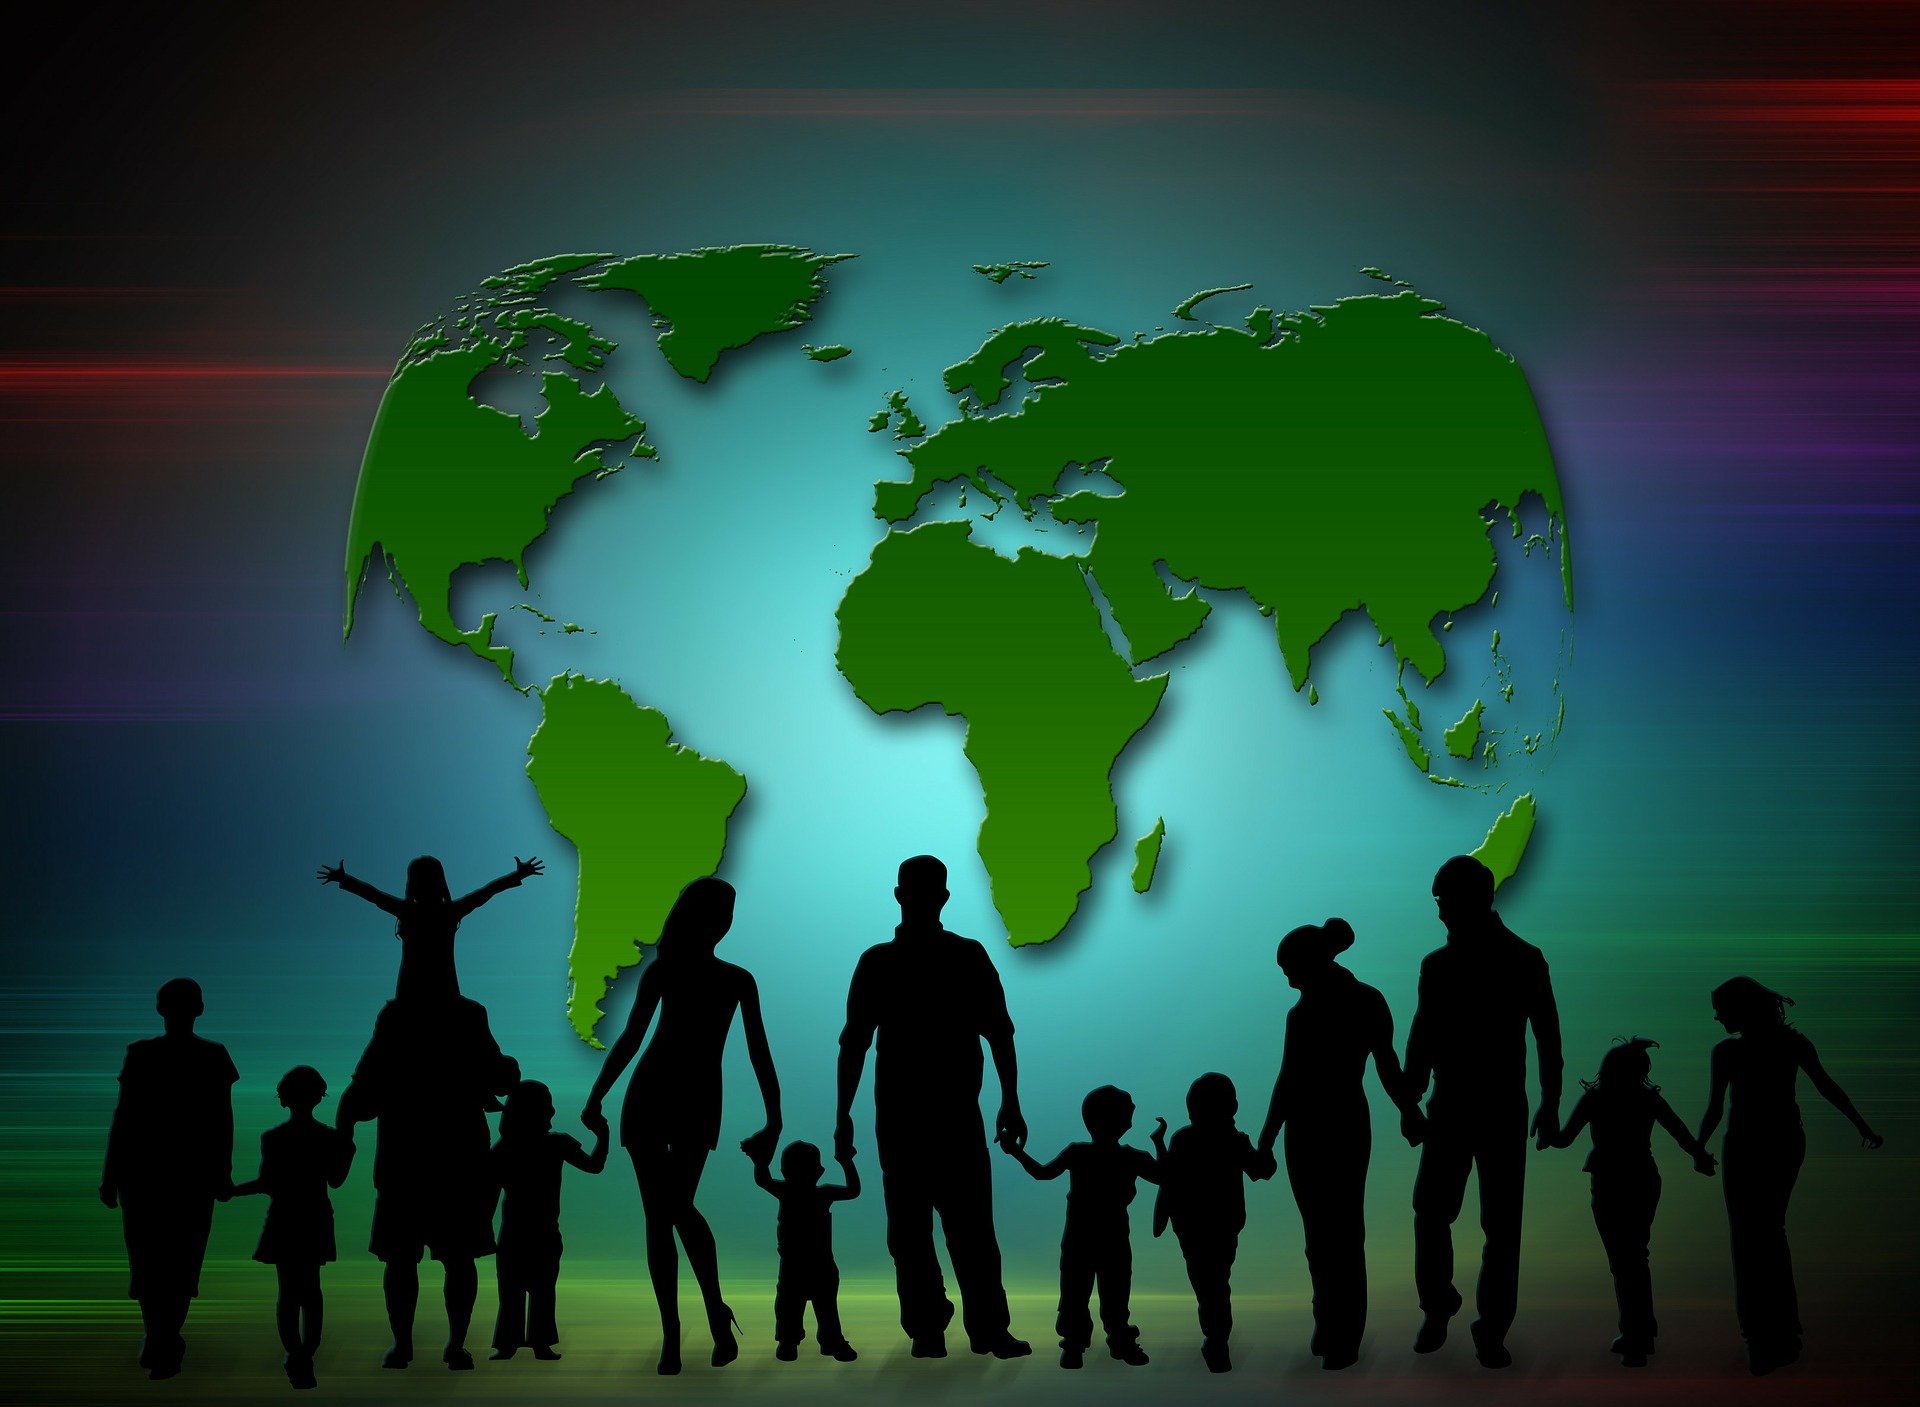 Illustration of families coming together worldwide. | Source: Pixabay.